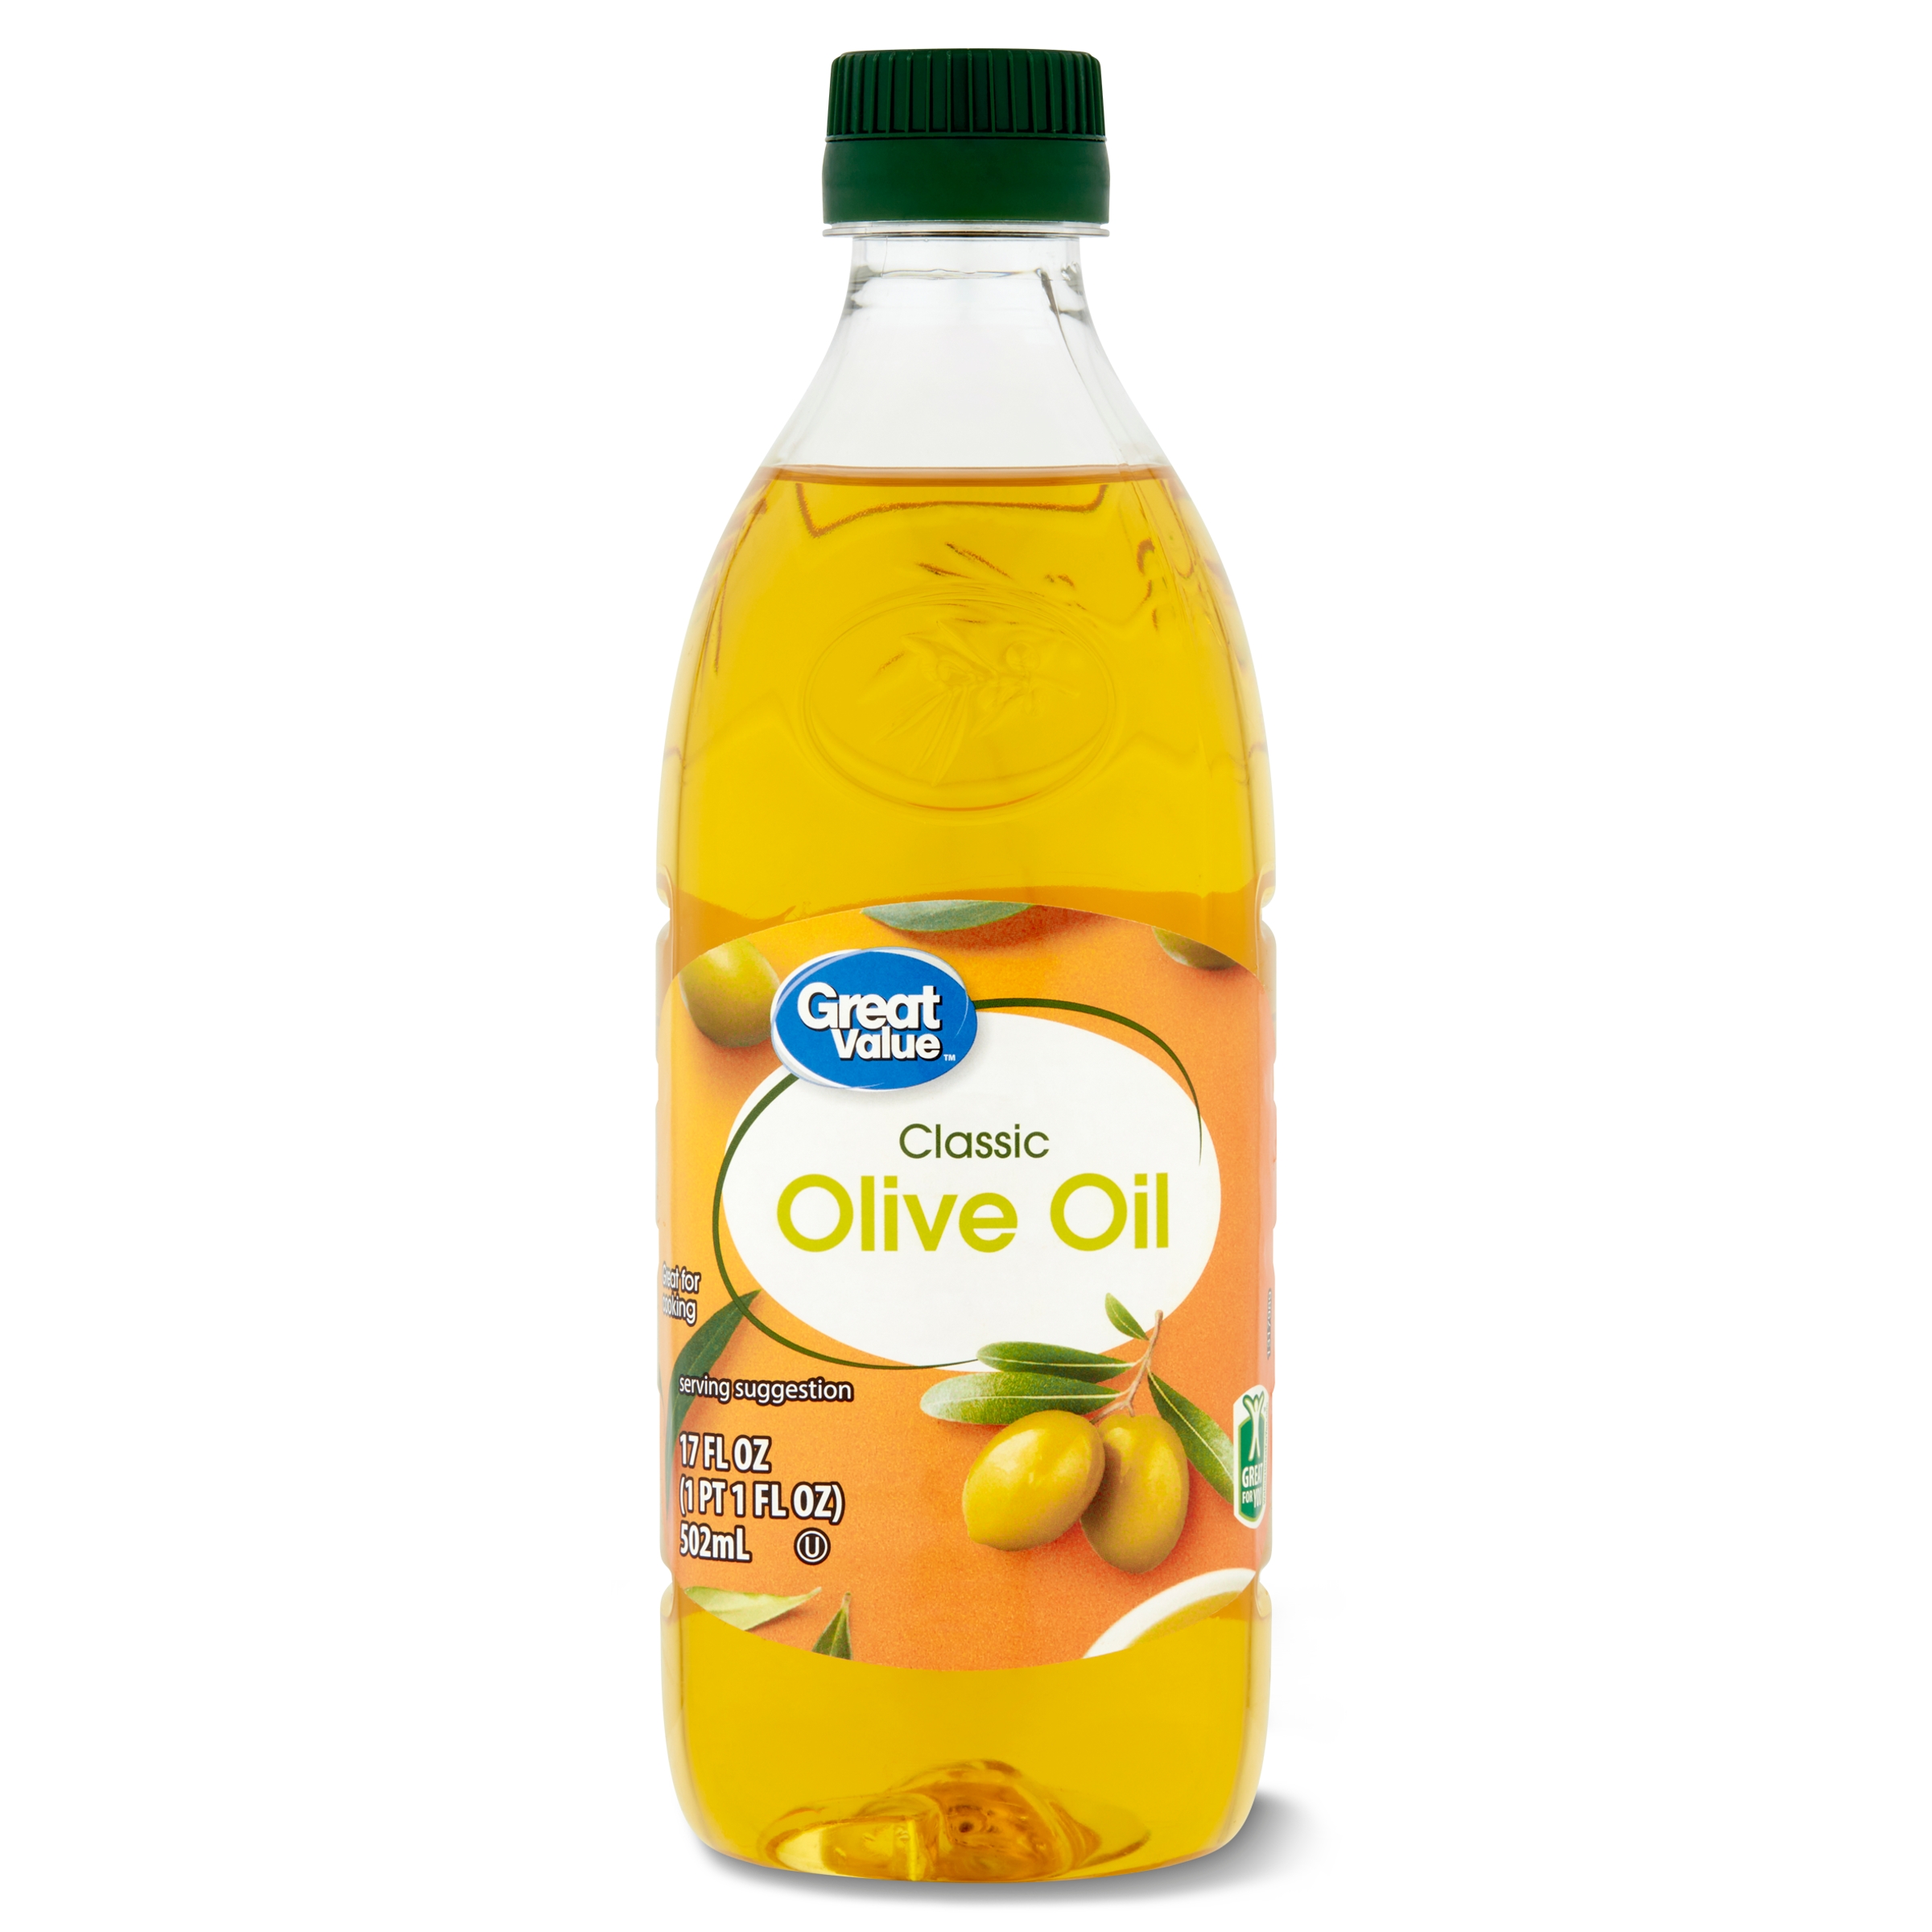 Great Value Classic Olive Oil, 17 fl oz - image 1 of 7